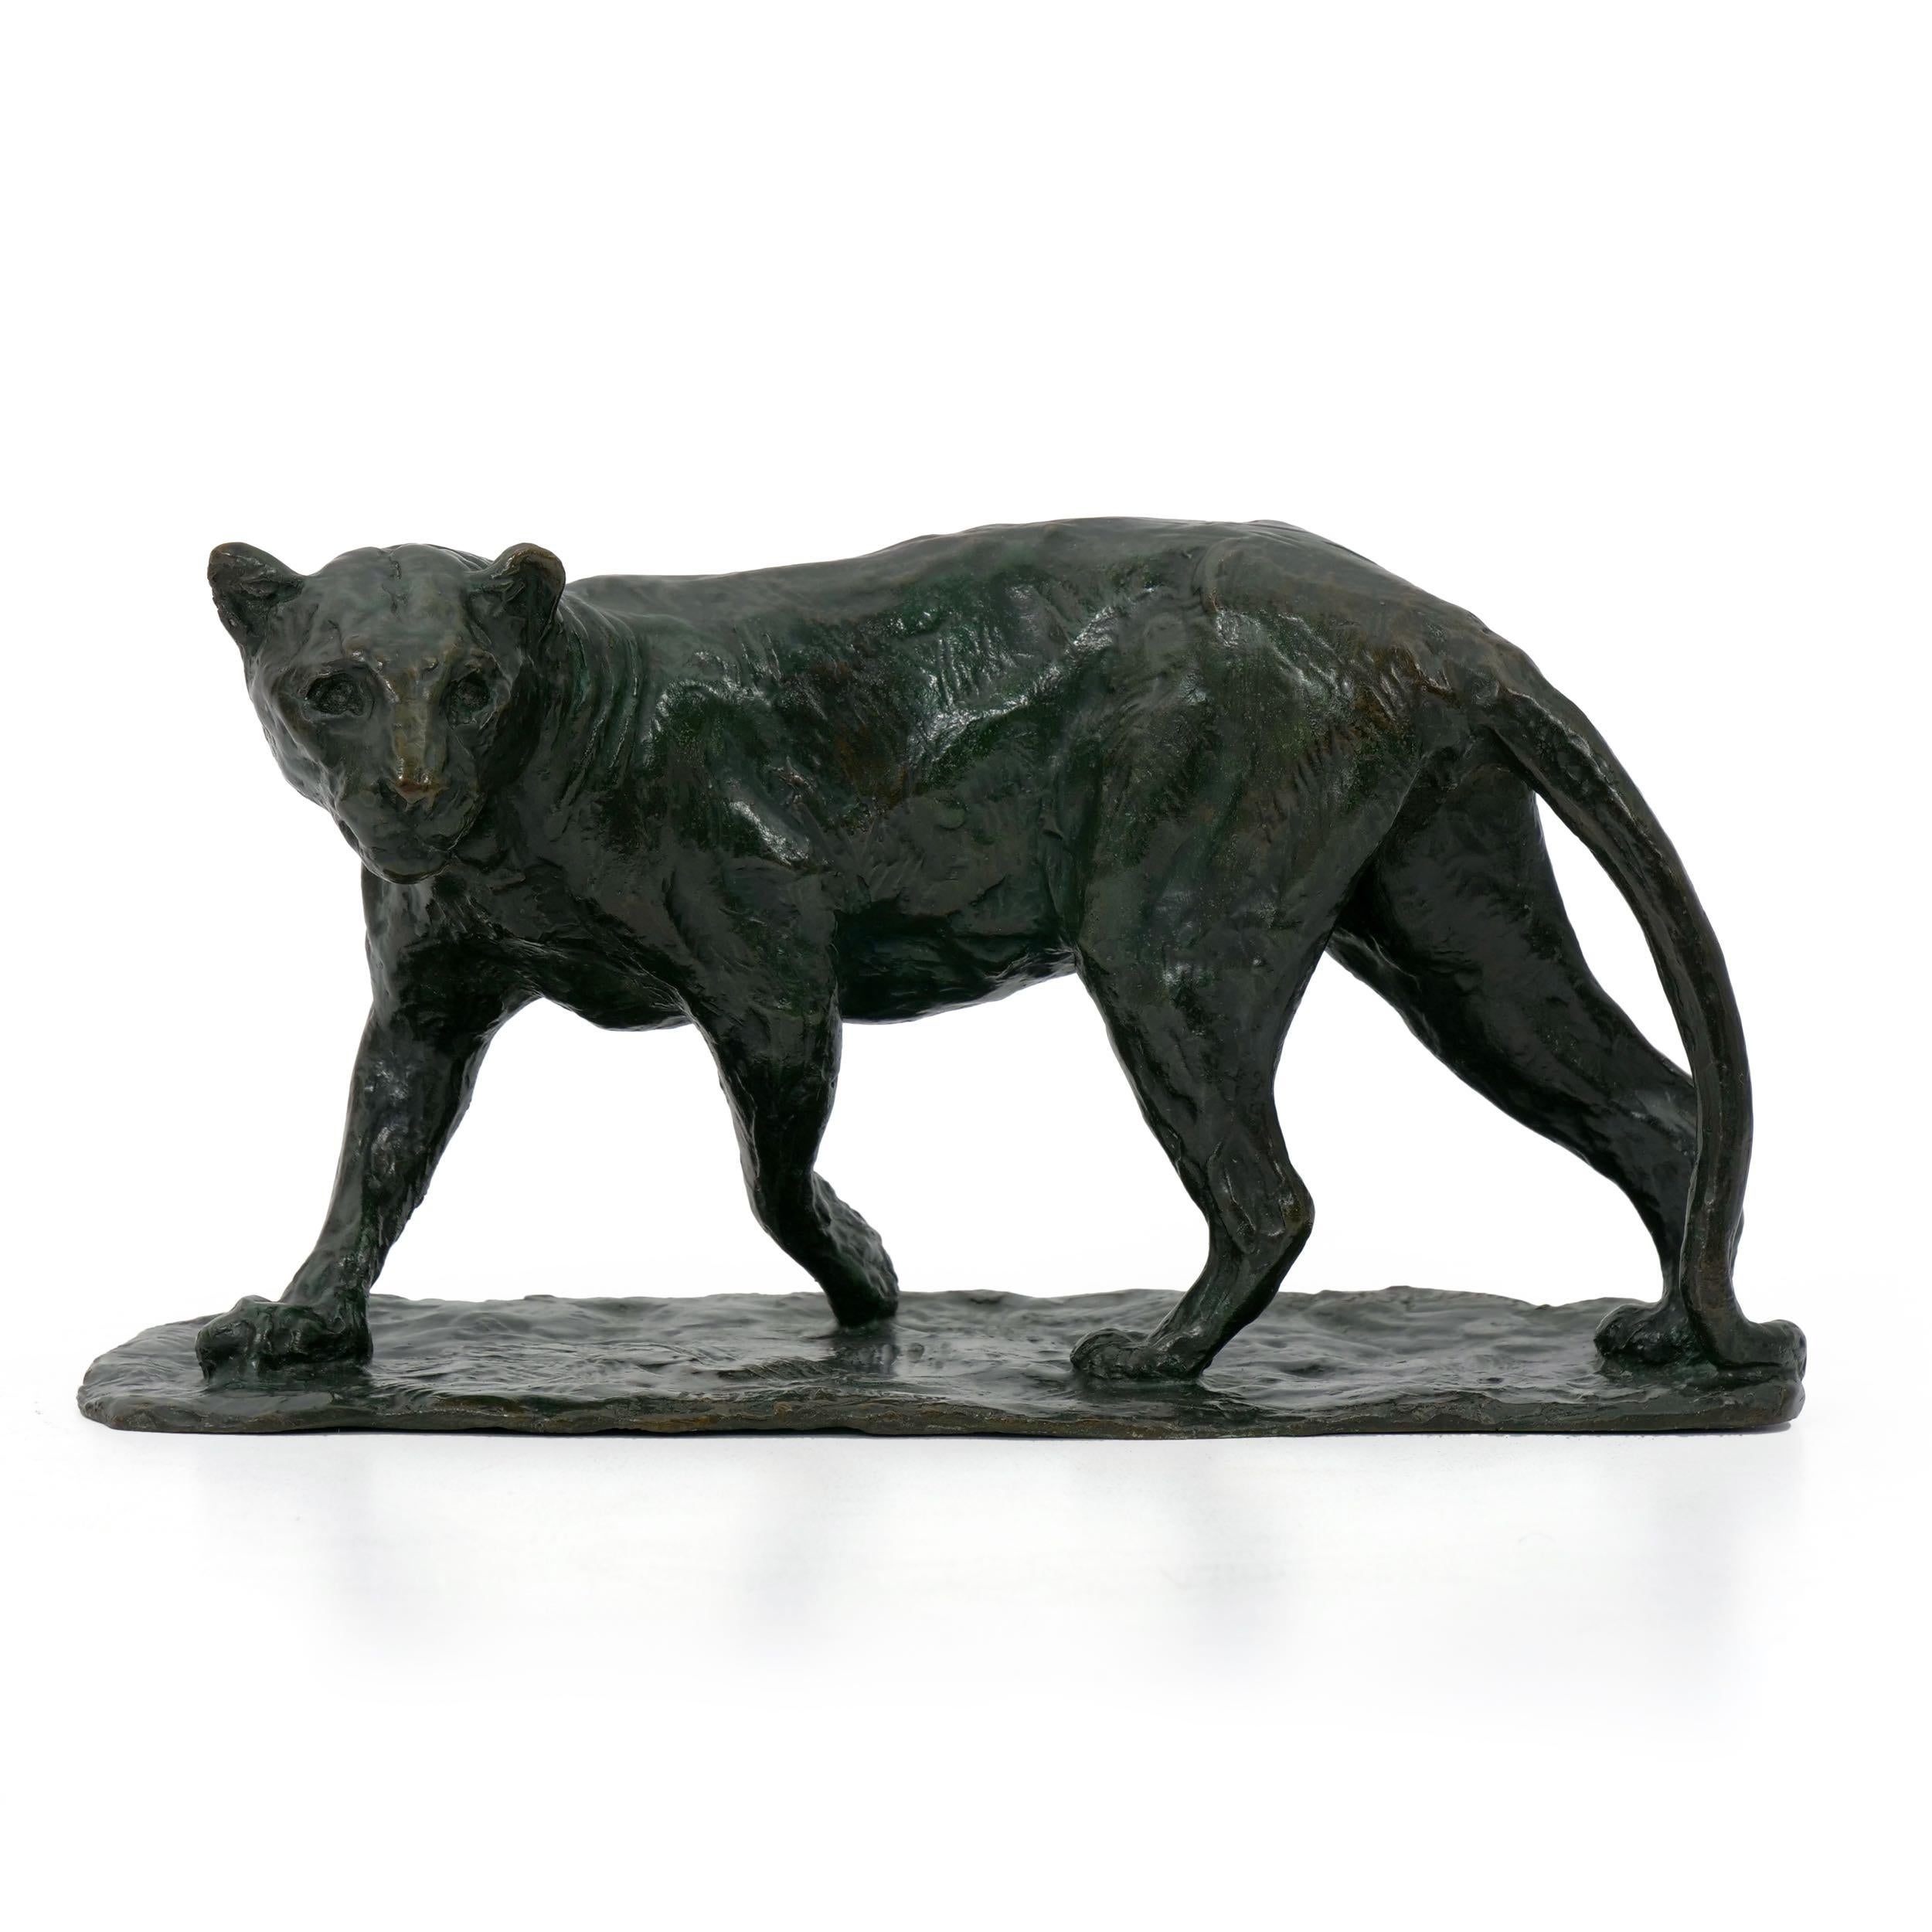 Executed in a very fine overall green patination with hints of bronze, browns and blacks, the subject is soft and slinky in her movement. The subject is sometimes noted as “Panther”, as in the case of the work by Forrest (p. 220) and most examples